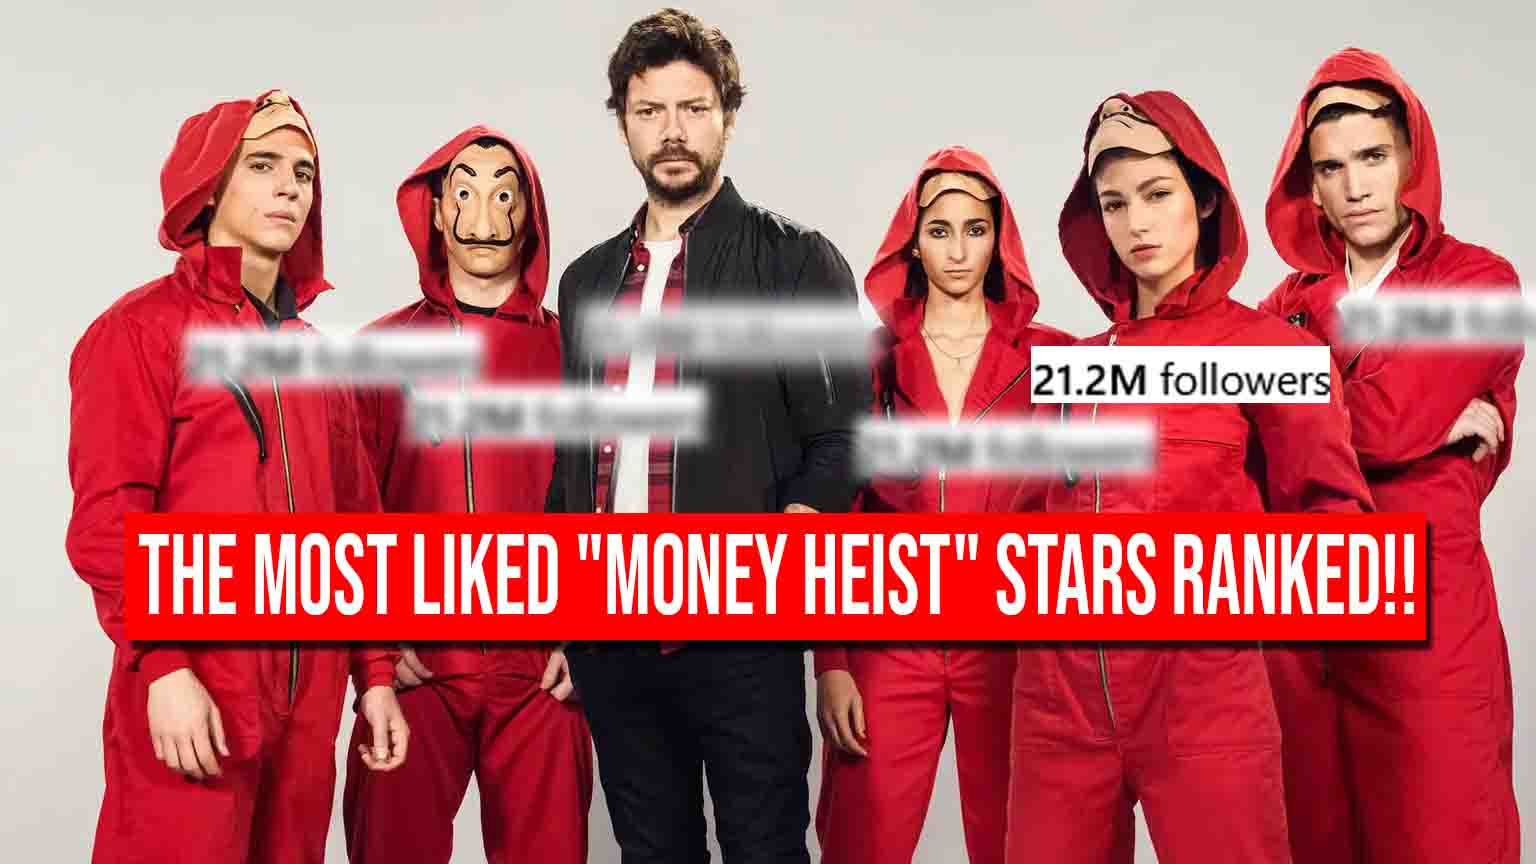 The Most Liked “Money Heist” Stars Ranked From Lowest To Highest Following!!!!